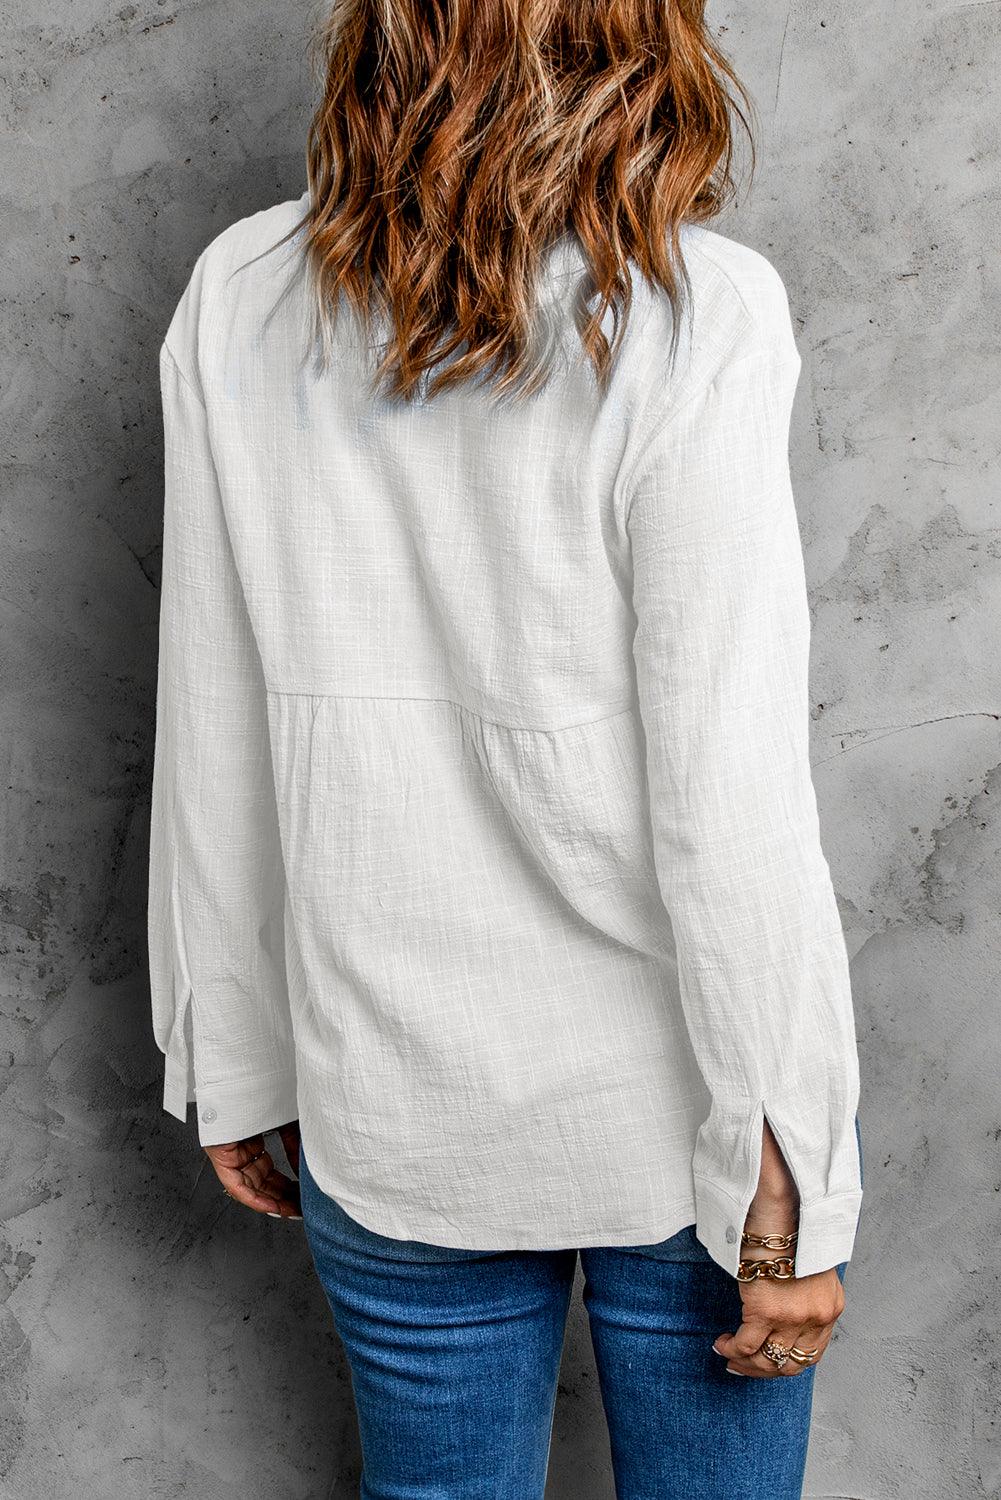 White Textured Solid Color Basic Shirt - L & M Kee, LLC